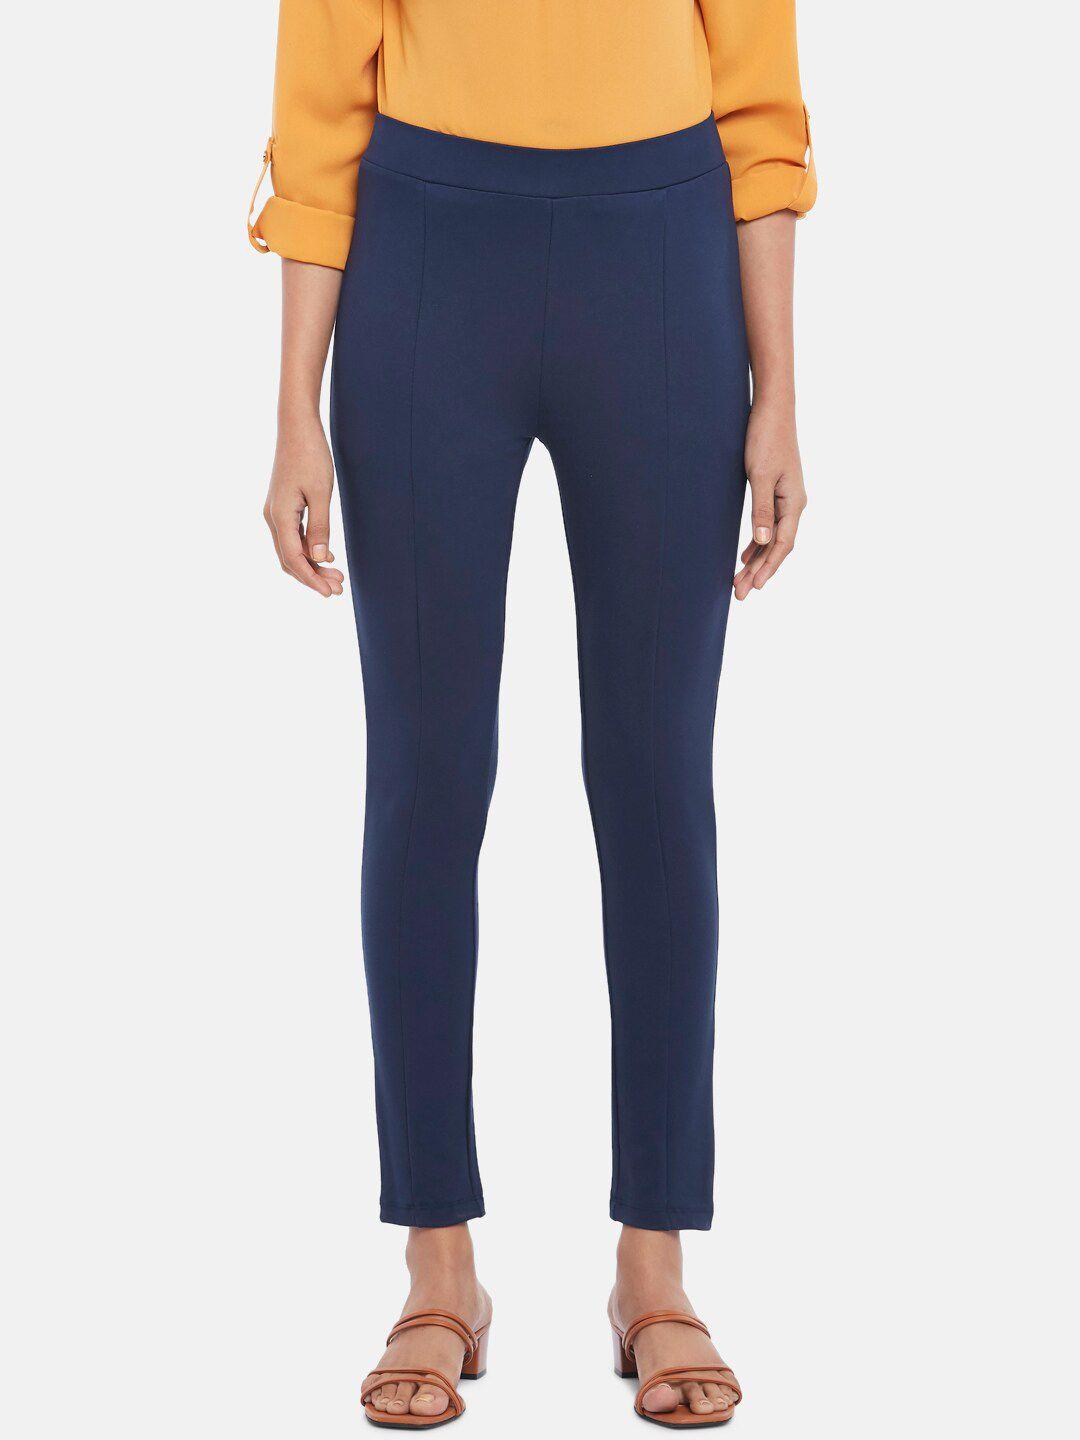 annabelle-by-pantaloons-women-navy-blue-solid-skinny-fit-treggings